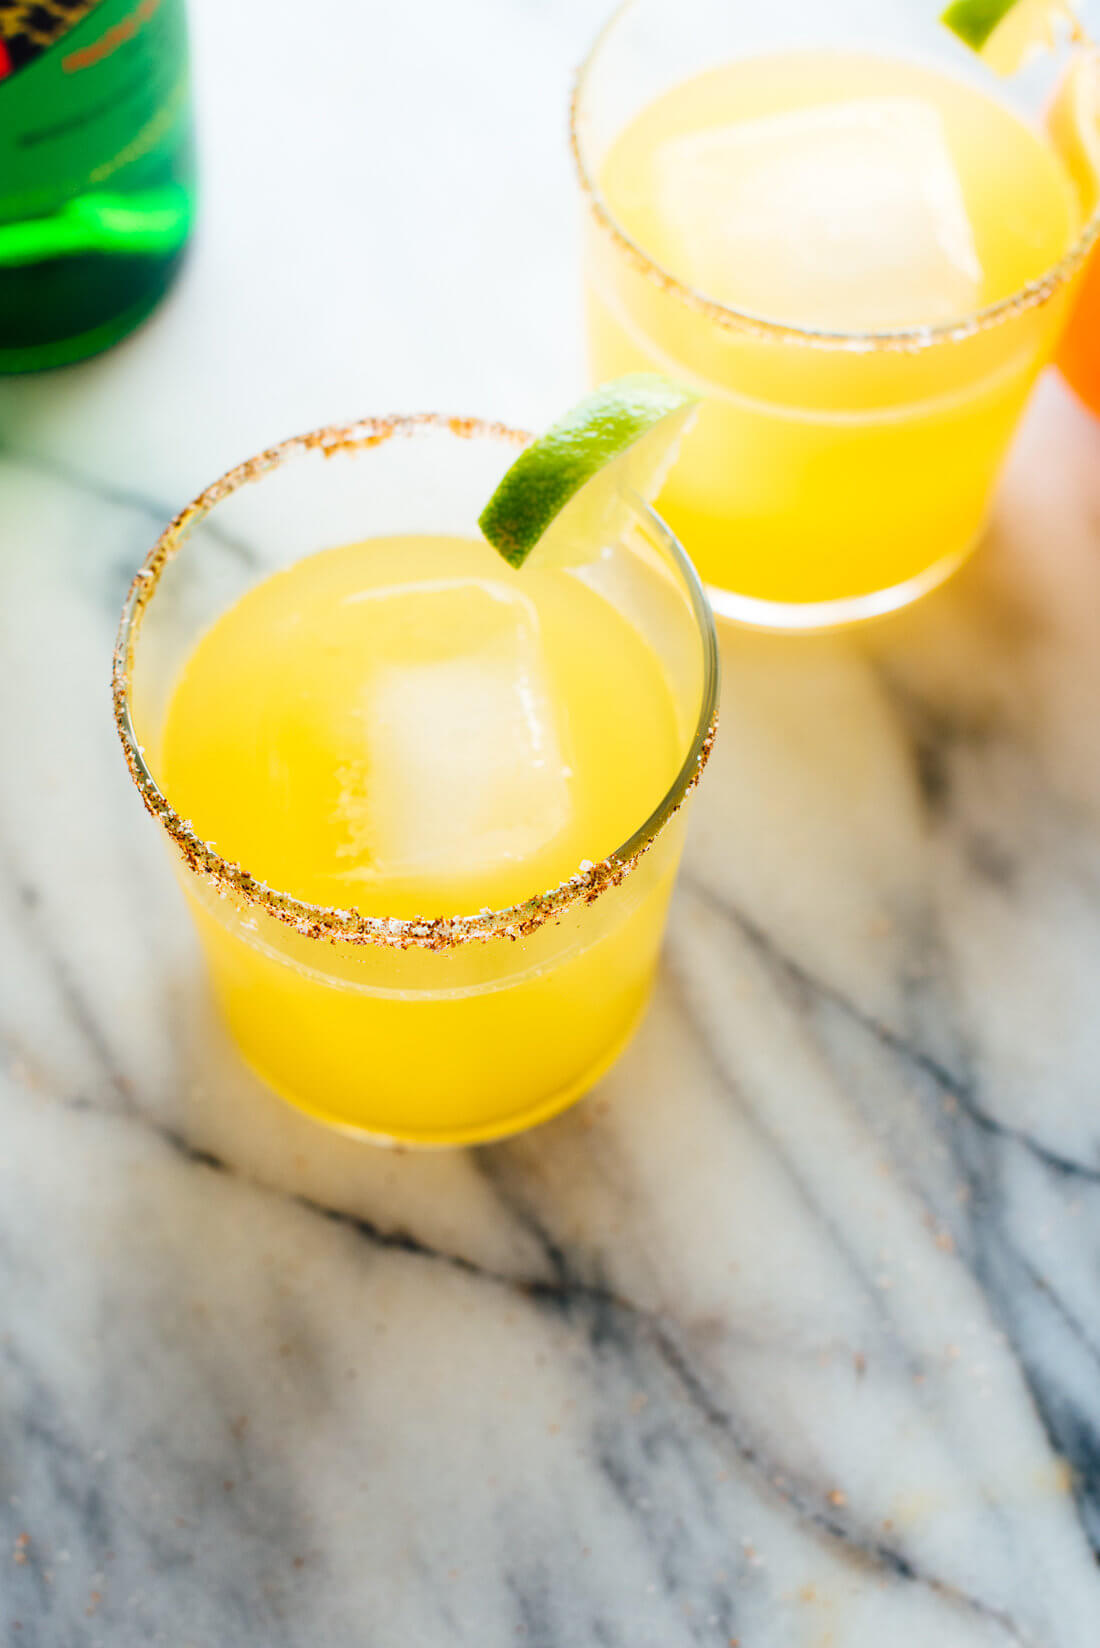 Delicious, fresh mezcalita recipe made with fresh orange and lime juices! Get this #cocktail #recipe at cookieandkate.com